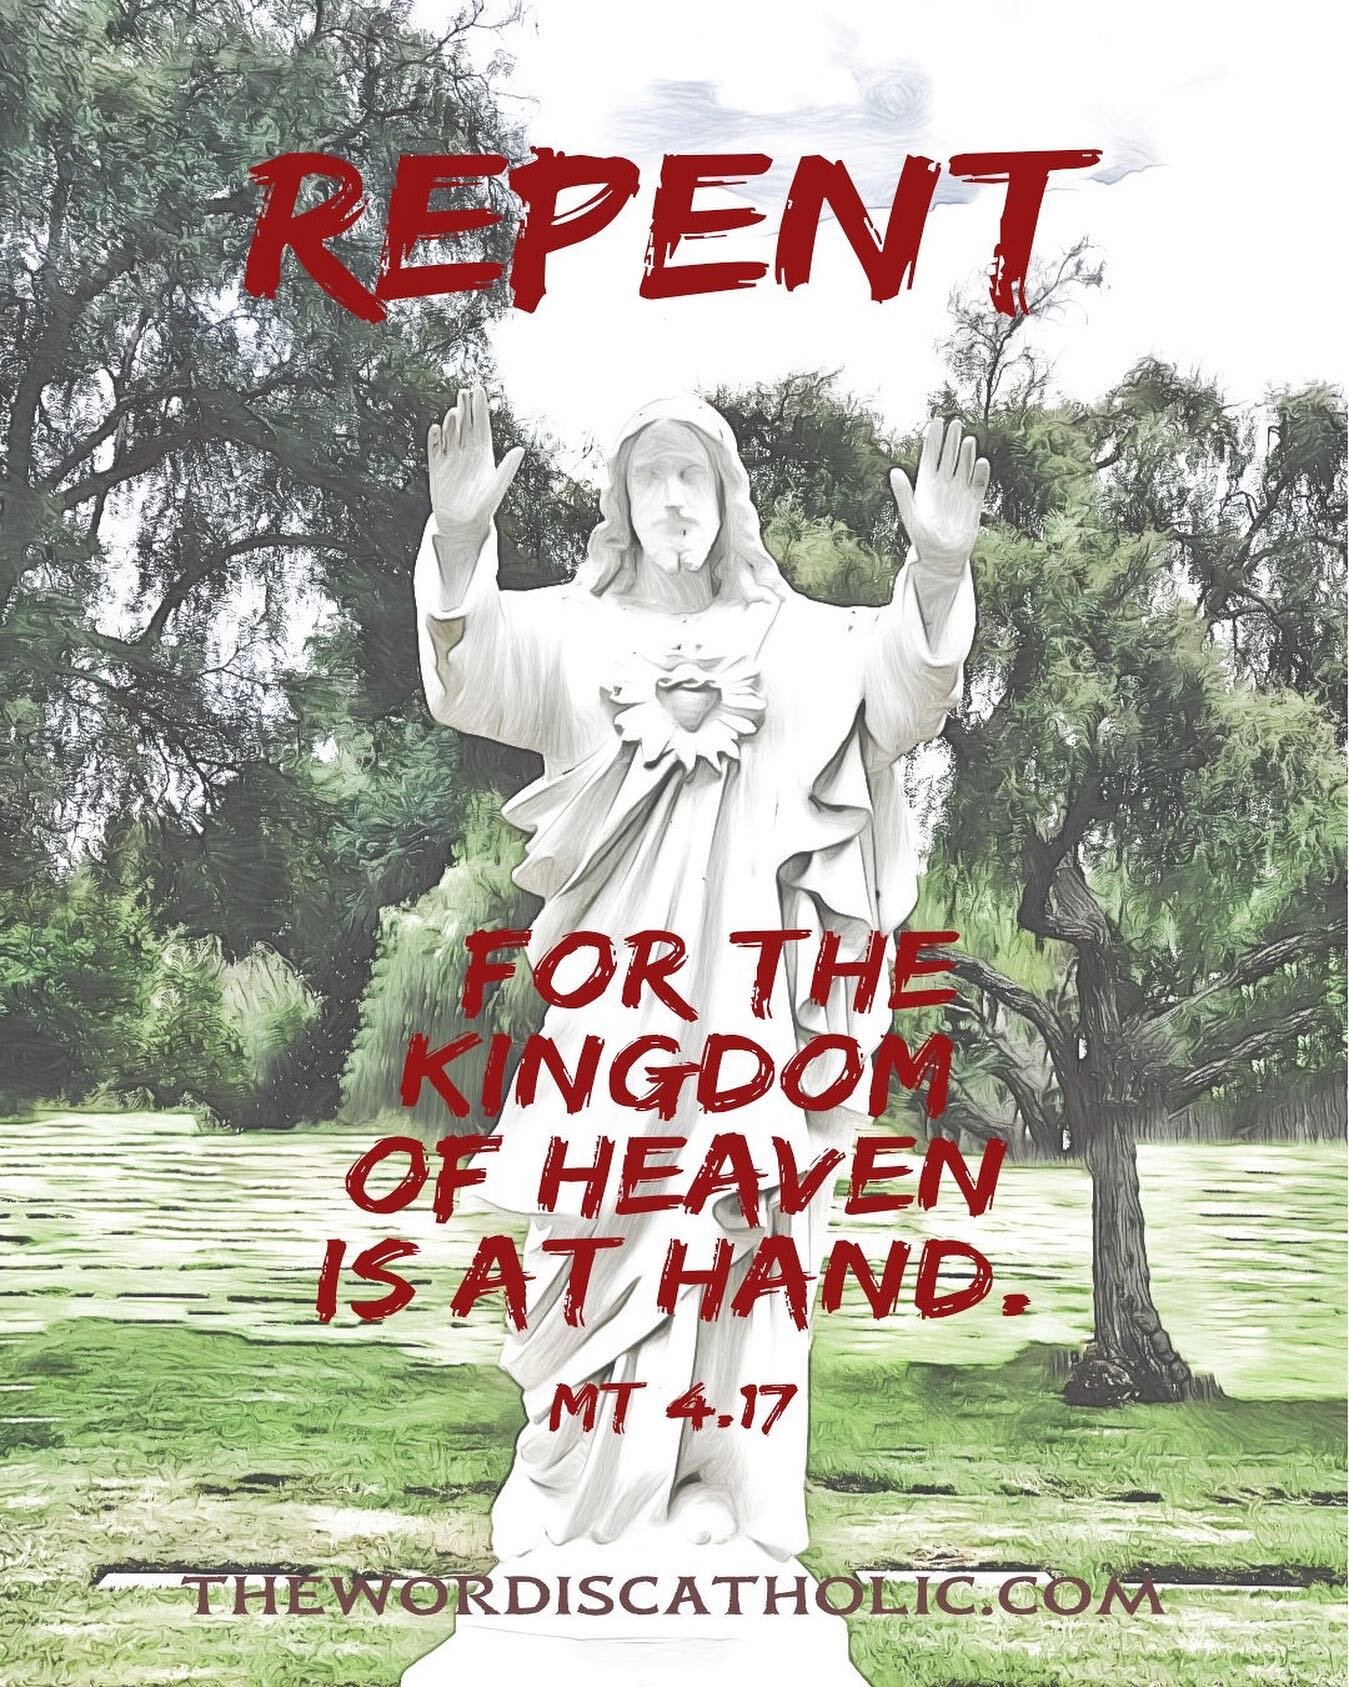 From that time Jesus began to preach and say, &ldquo;Repent, for the kingdom of heaven is at hand.&rdquo;
.
[Mt 4:17]
.
.
.
.
#prayer #rosary #askseekknock #seekthelord #holyrosary #prayerwarrior #catholic #praytherosary #matthew #findthelight #love 